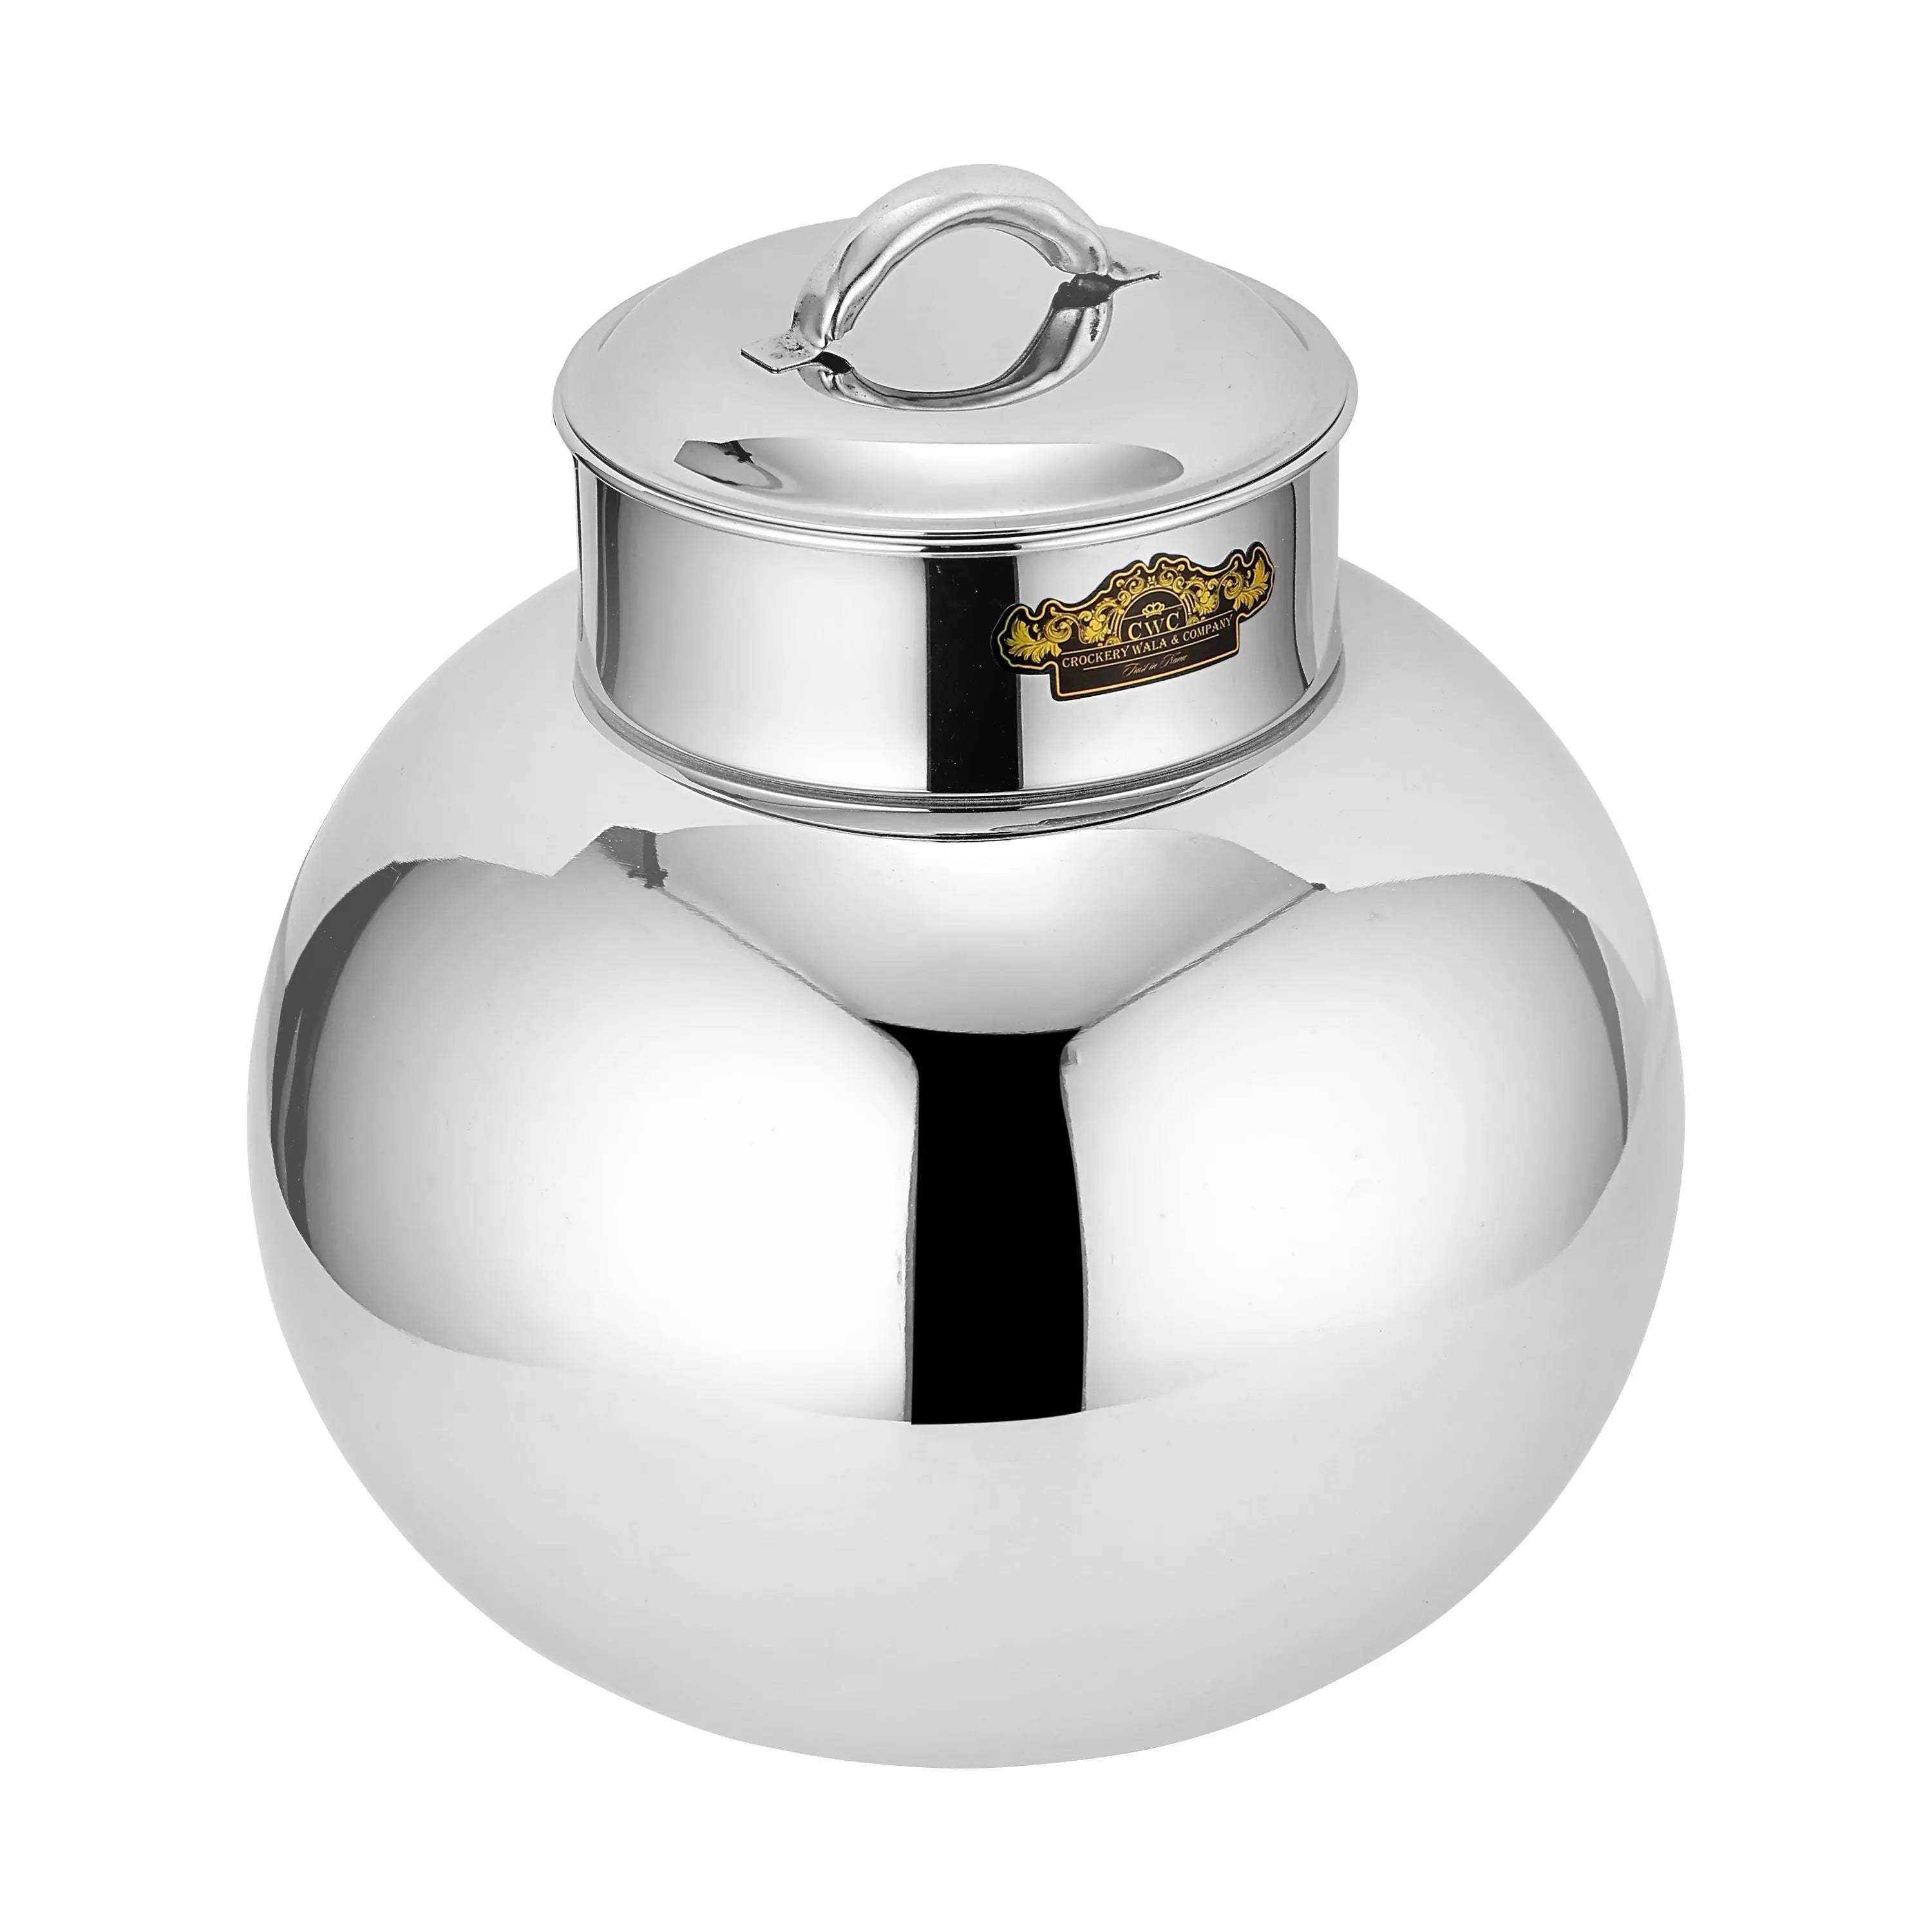 STAINLESS STEEL PLAIN MATKA 5 LTR PREMIUM QUALITY WITH LIFE TIME GUARANTEE - CROCKERY WALA AND COMPANY 